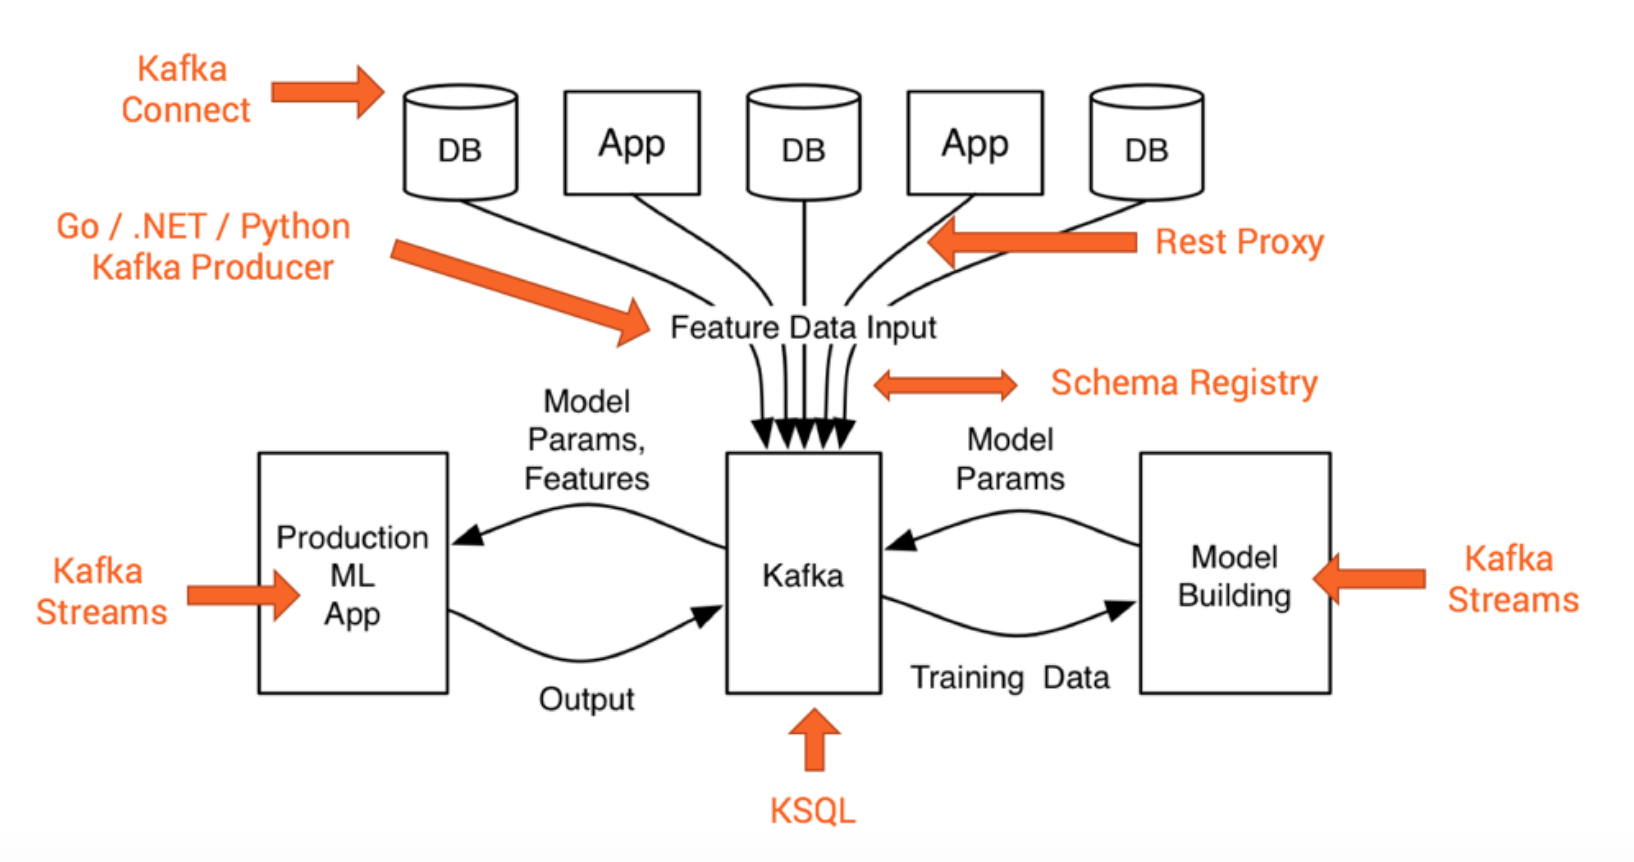 Kafka Open Source Ecosystem for a Scalable Mission Critical Machine Learning Infrastructure